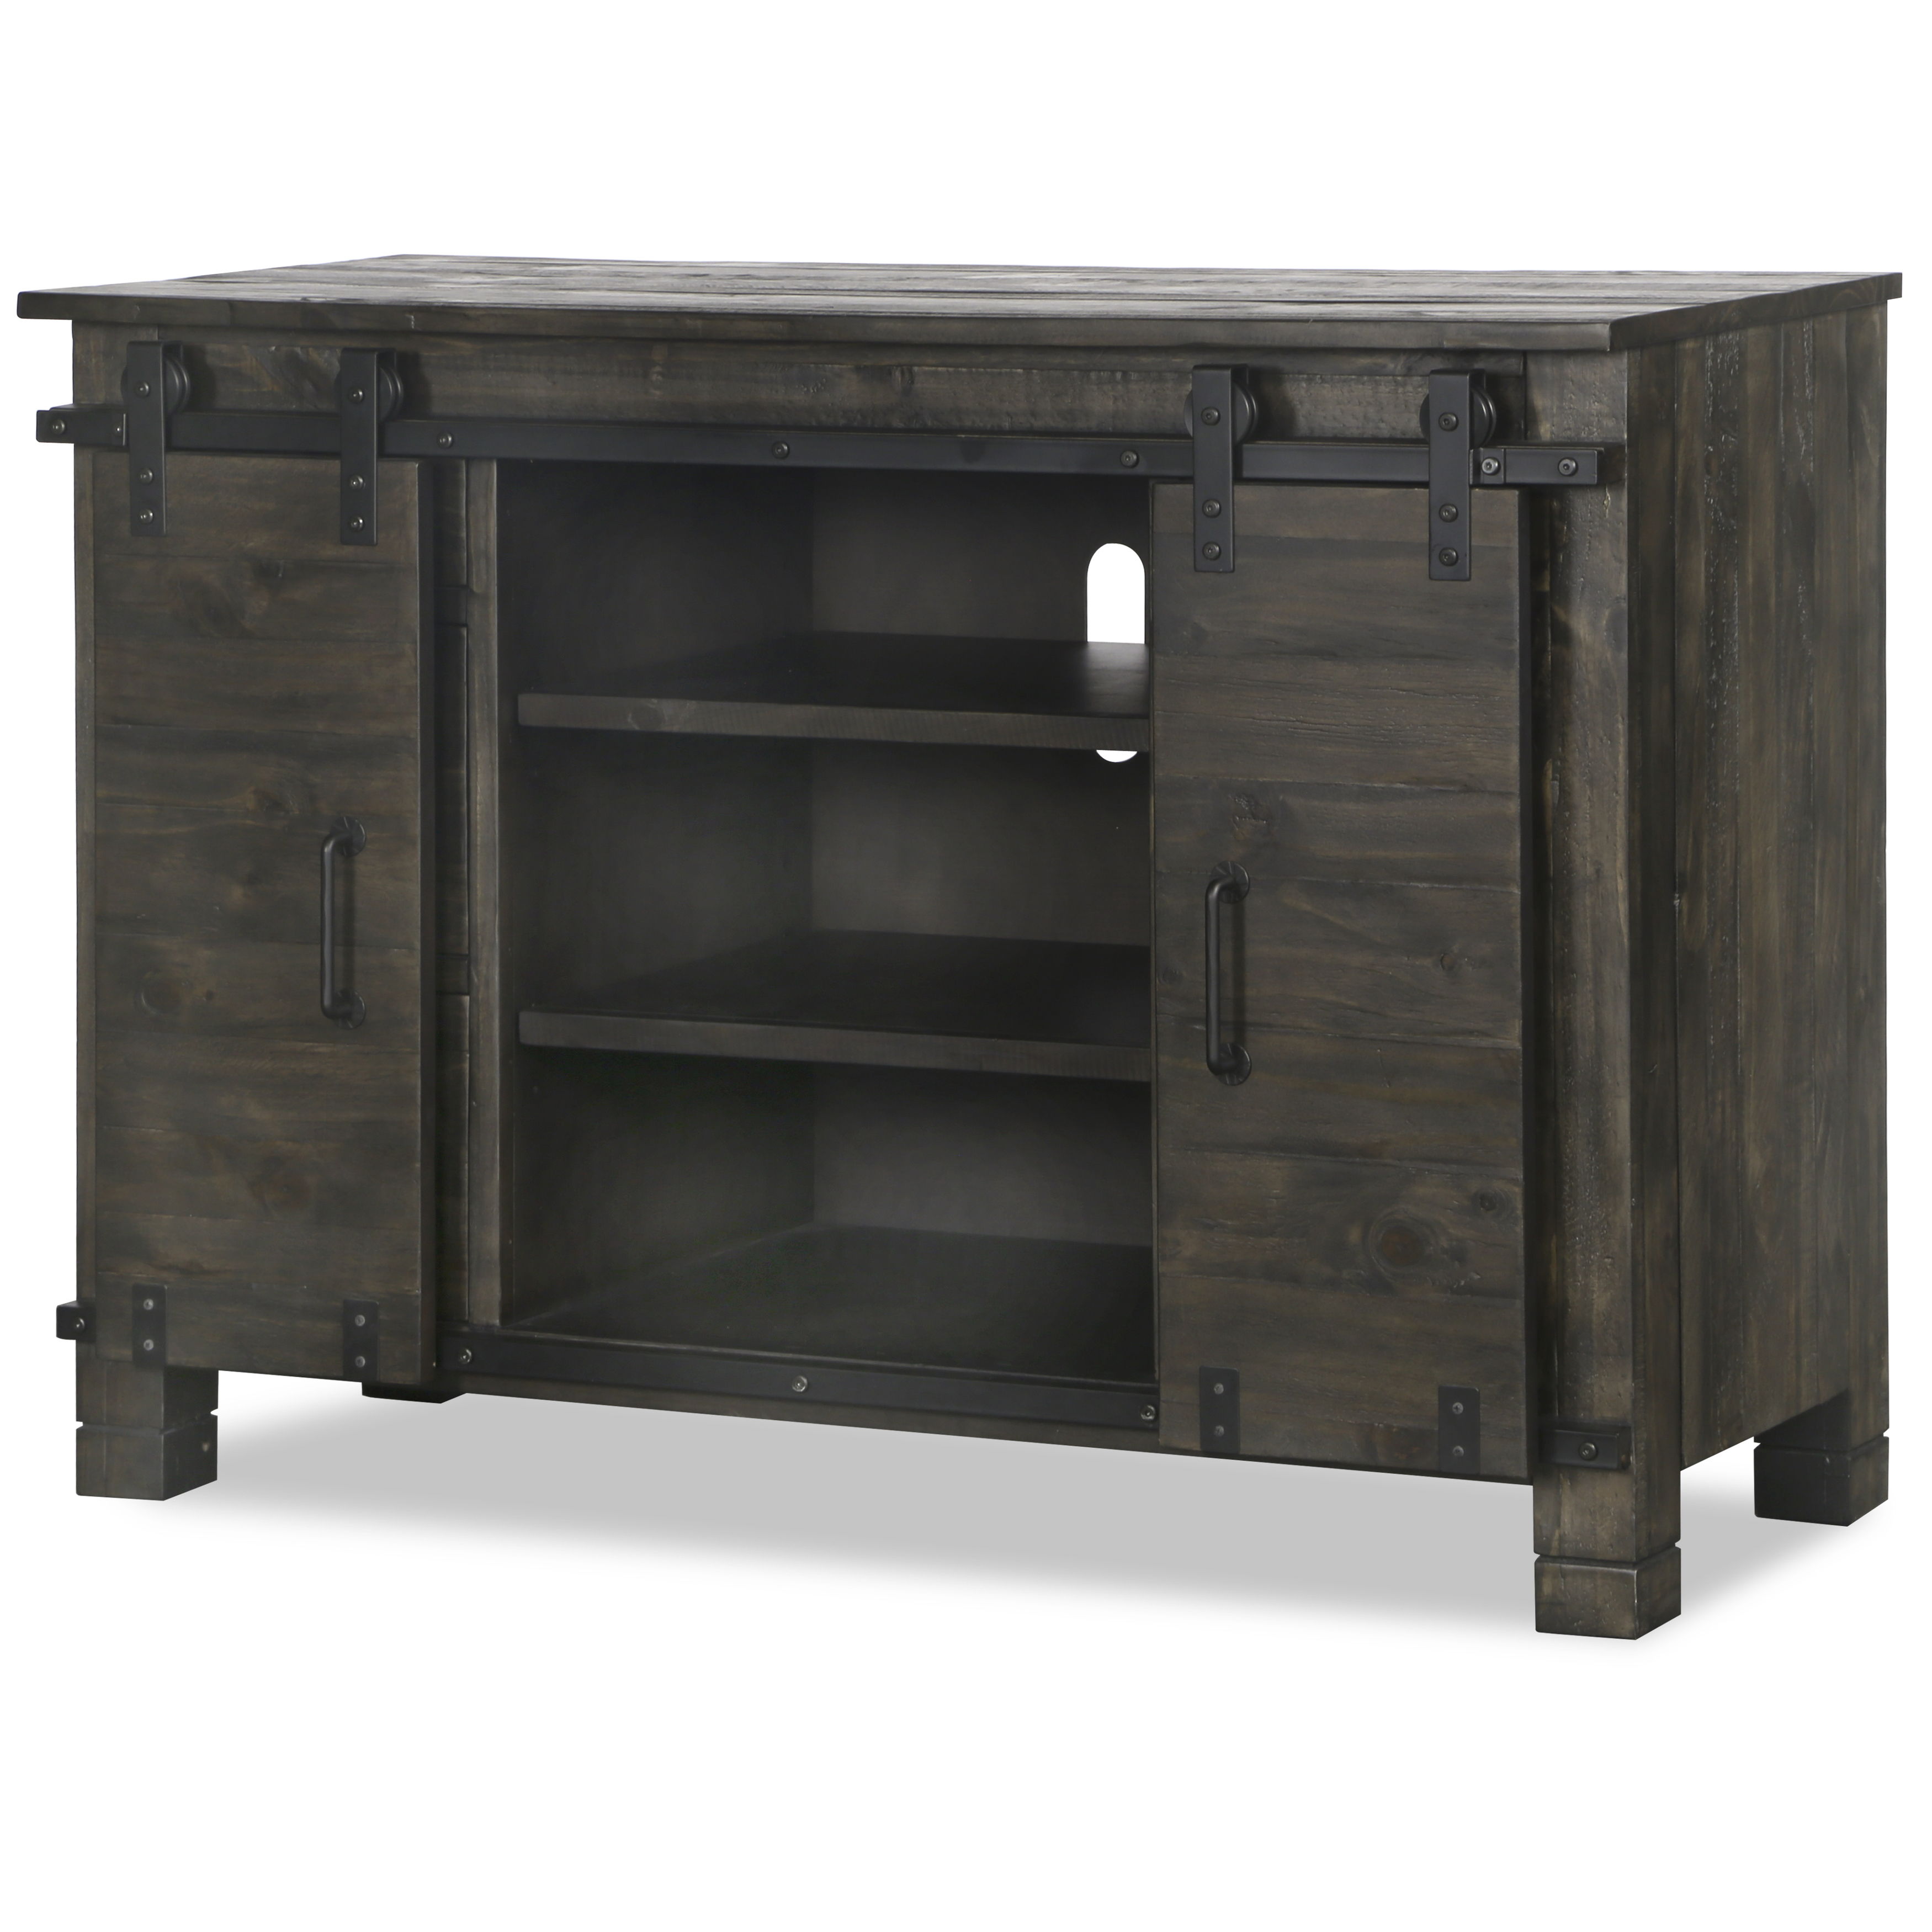 Abington - Media Chest - Weathered Charcoal